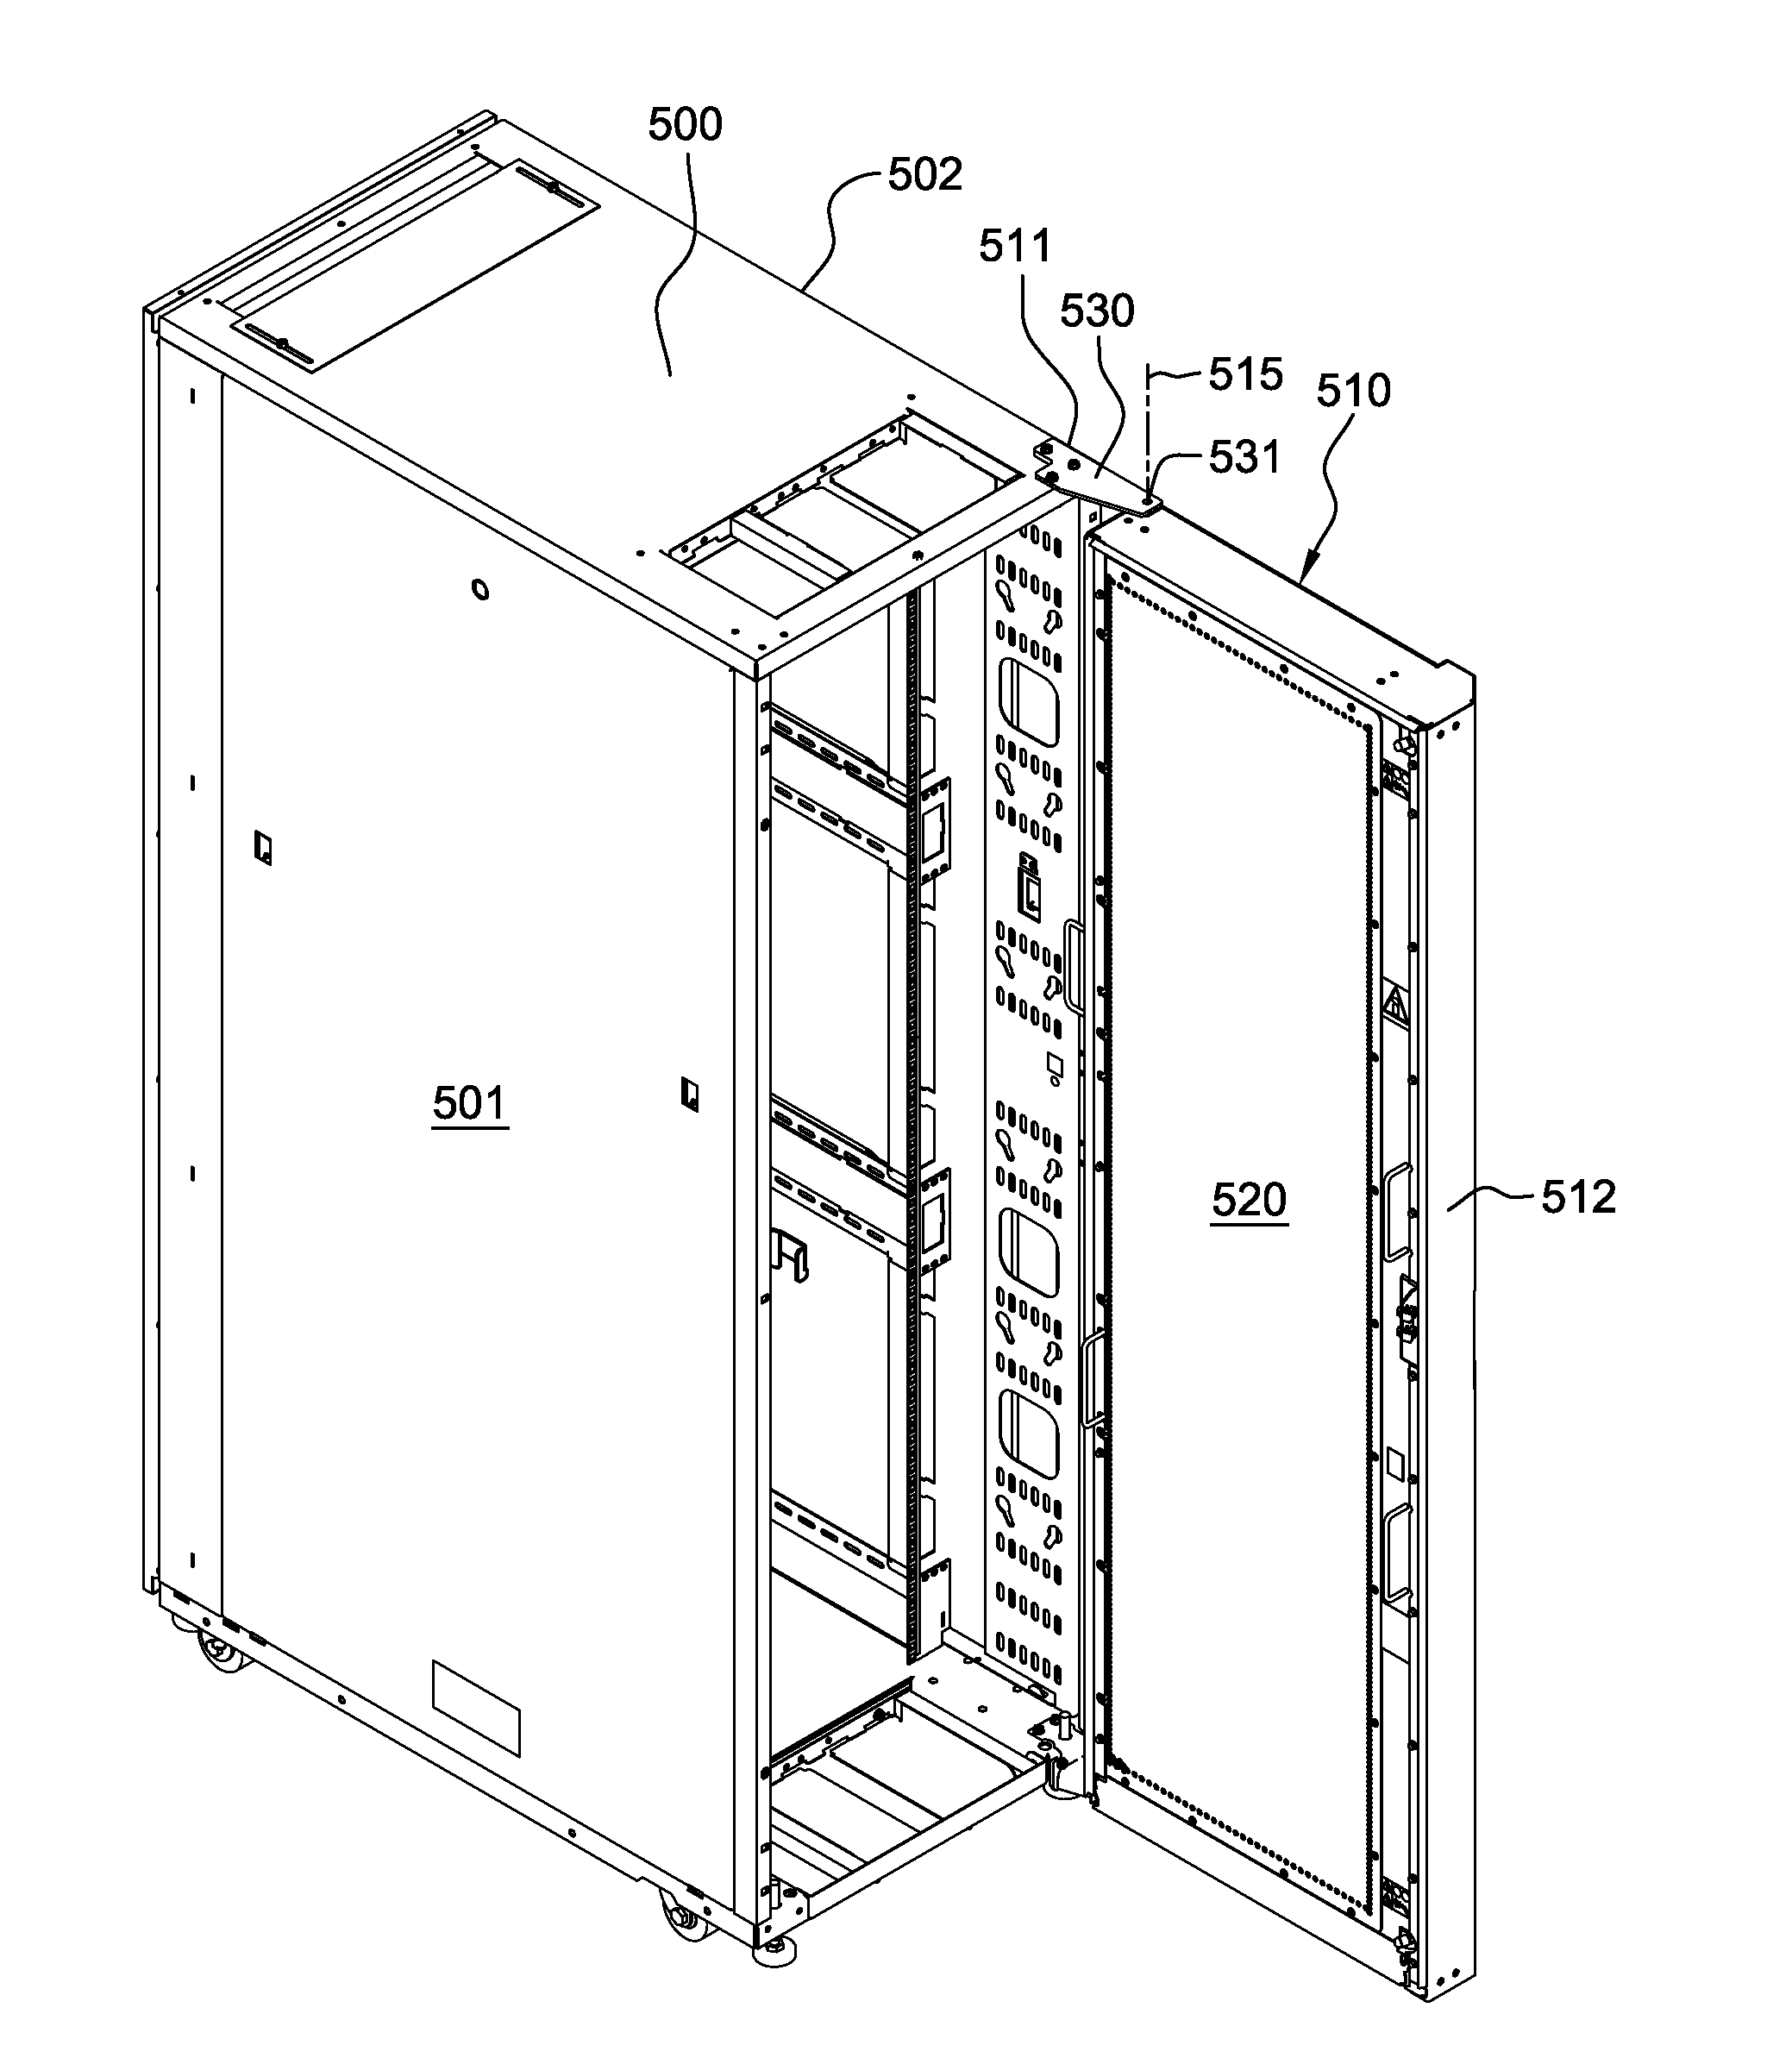 Structural configuration of a heat exchanger door for an electronics rack